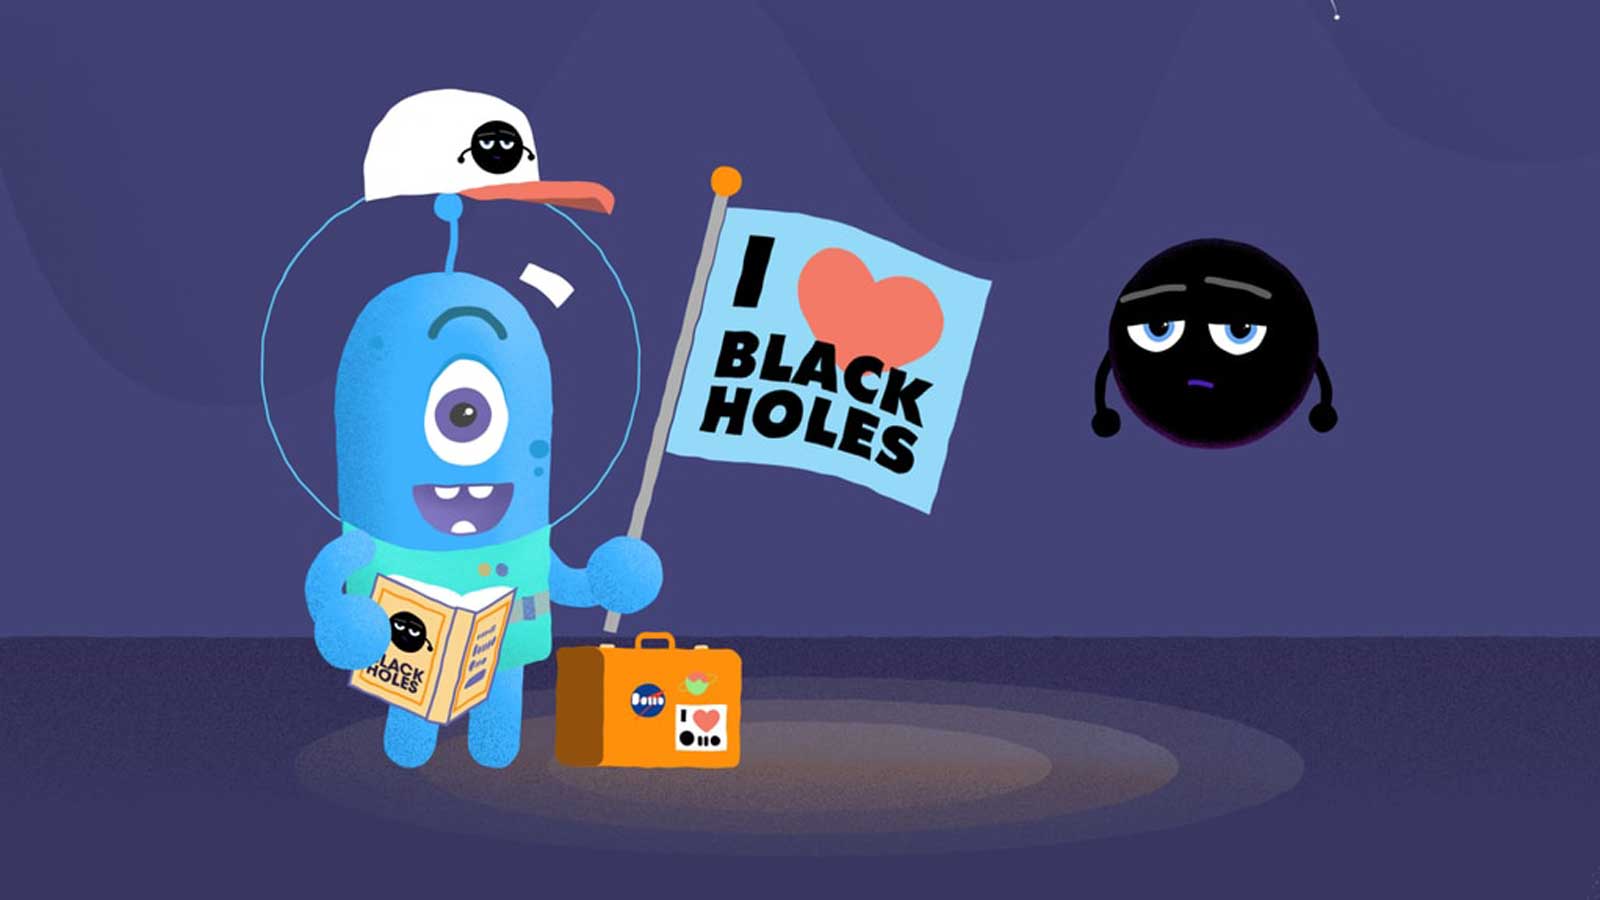 slide 2 - Cartoon of an alien in a spacesuit with a cartoon black hole